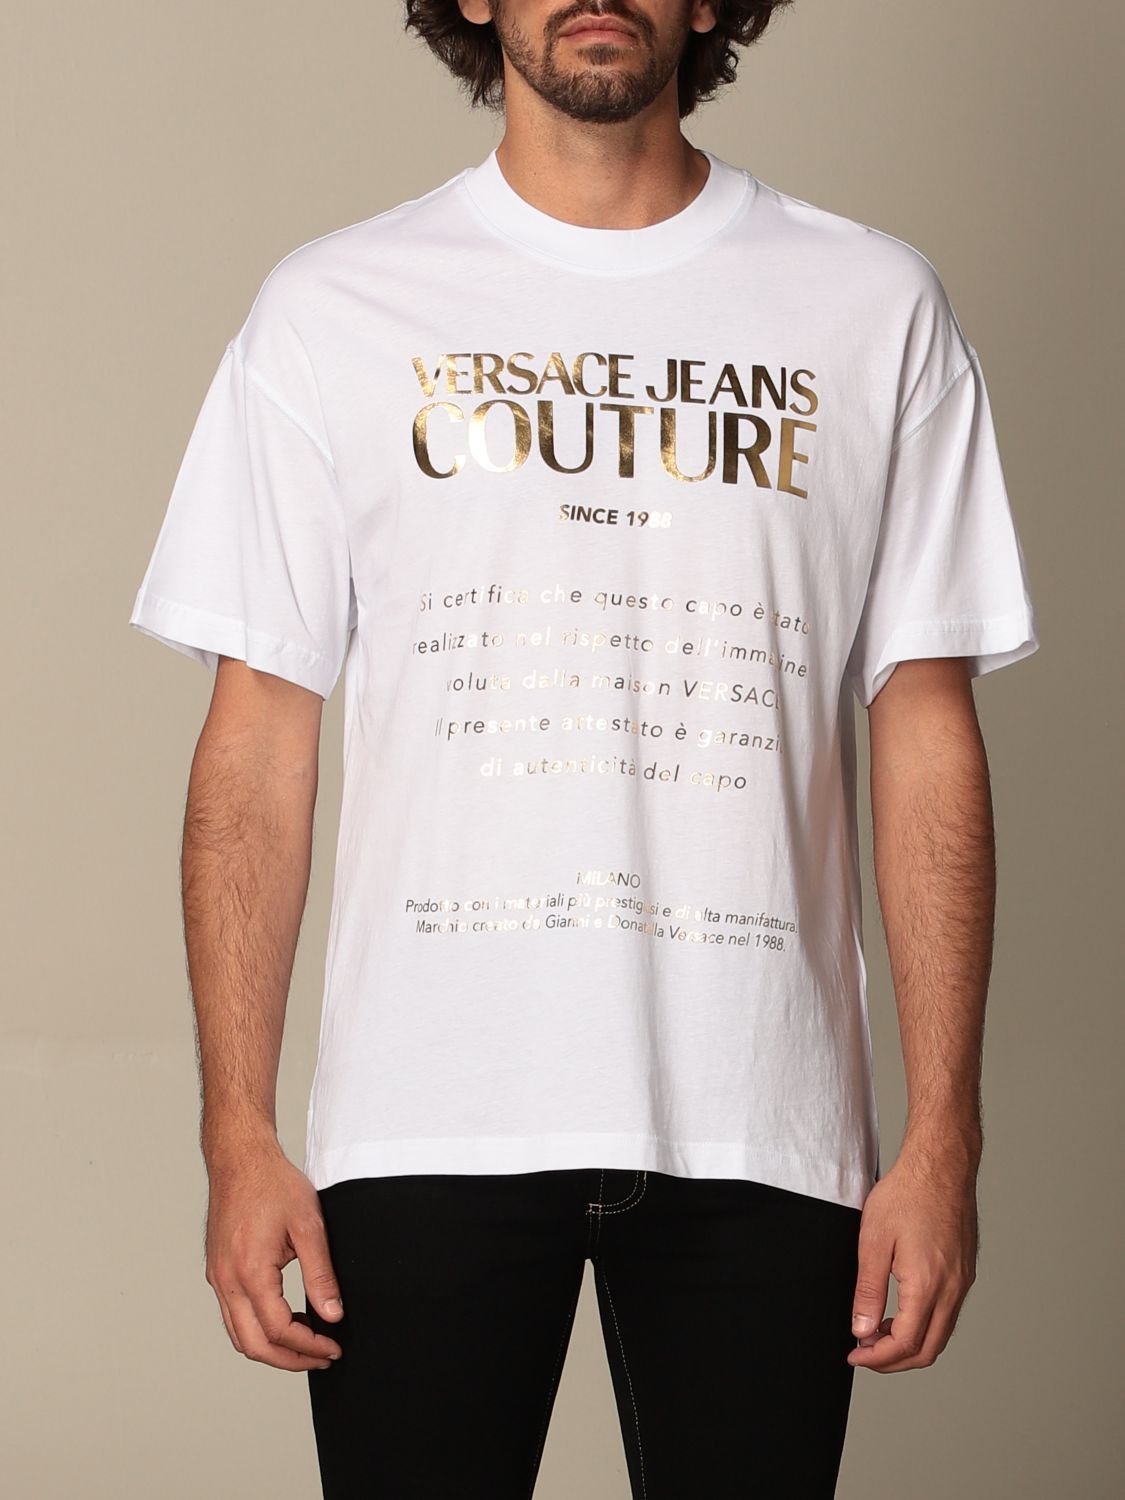 Versace Jeans Couture T Shirt With Laminated Print T Shirt Versace Jeans Couture Men White T Shirt Versace Jeans Couture gwa7tr Giglio En